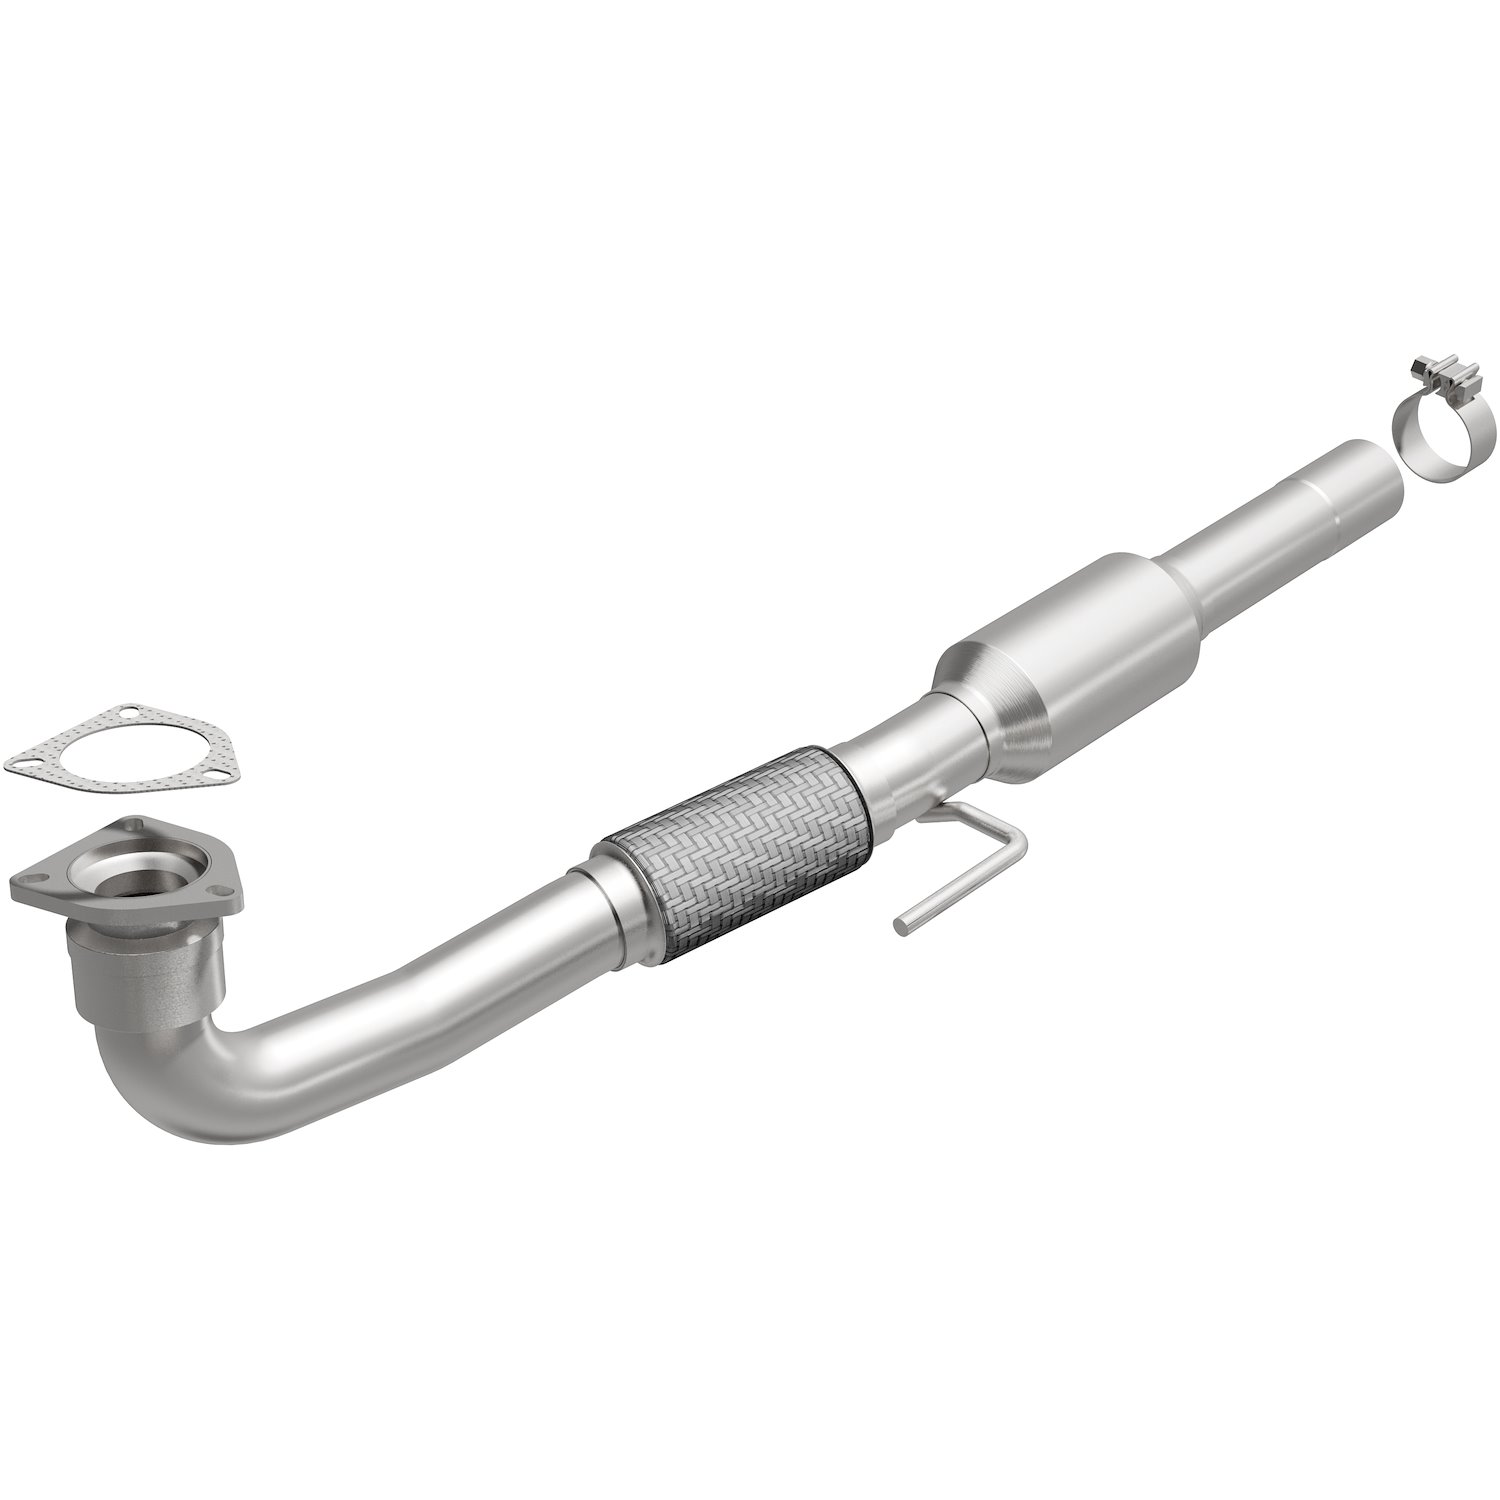 2006-2009 Saab 9-3 OEM Grade Federal / EPA Compliant Direct-Fit Catalytic Converter